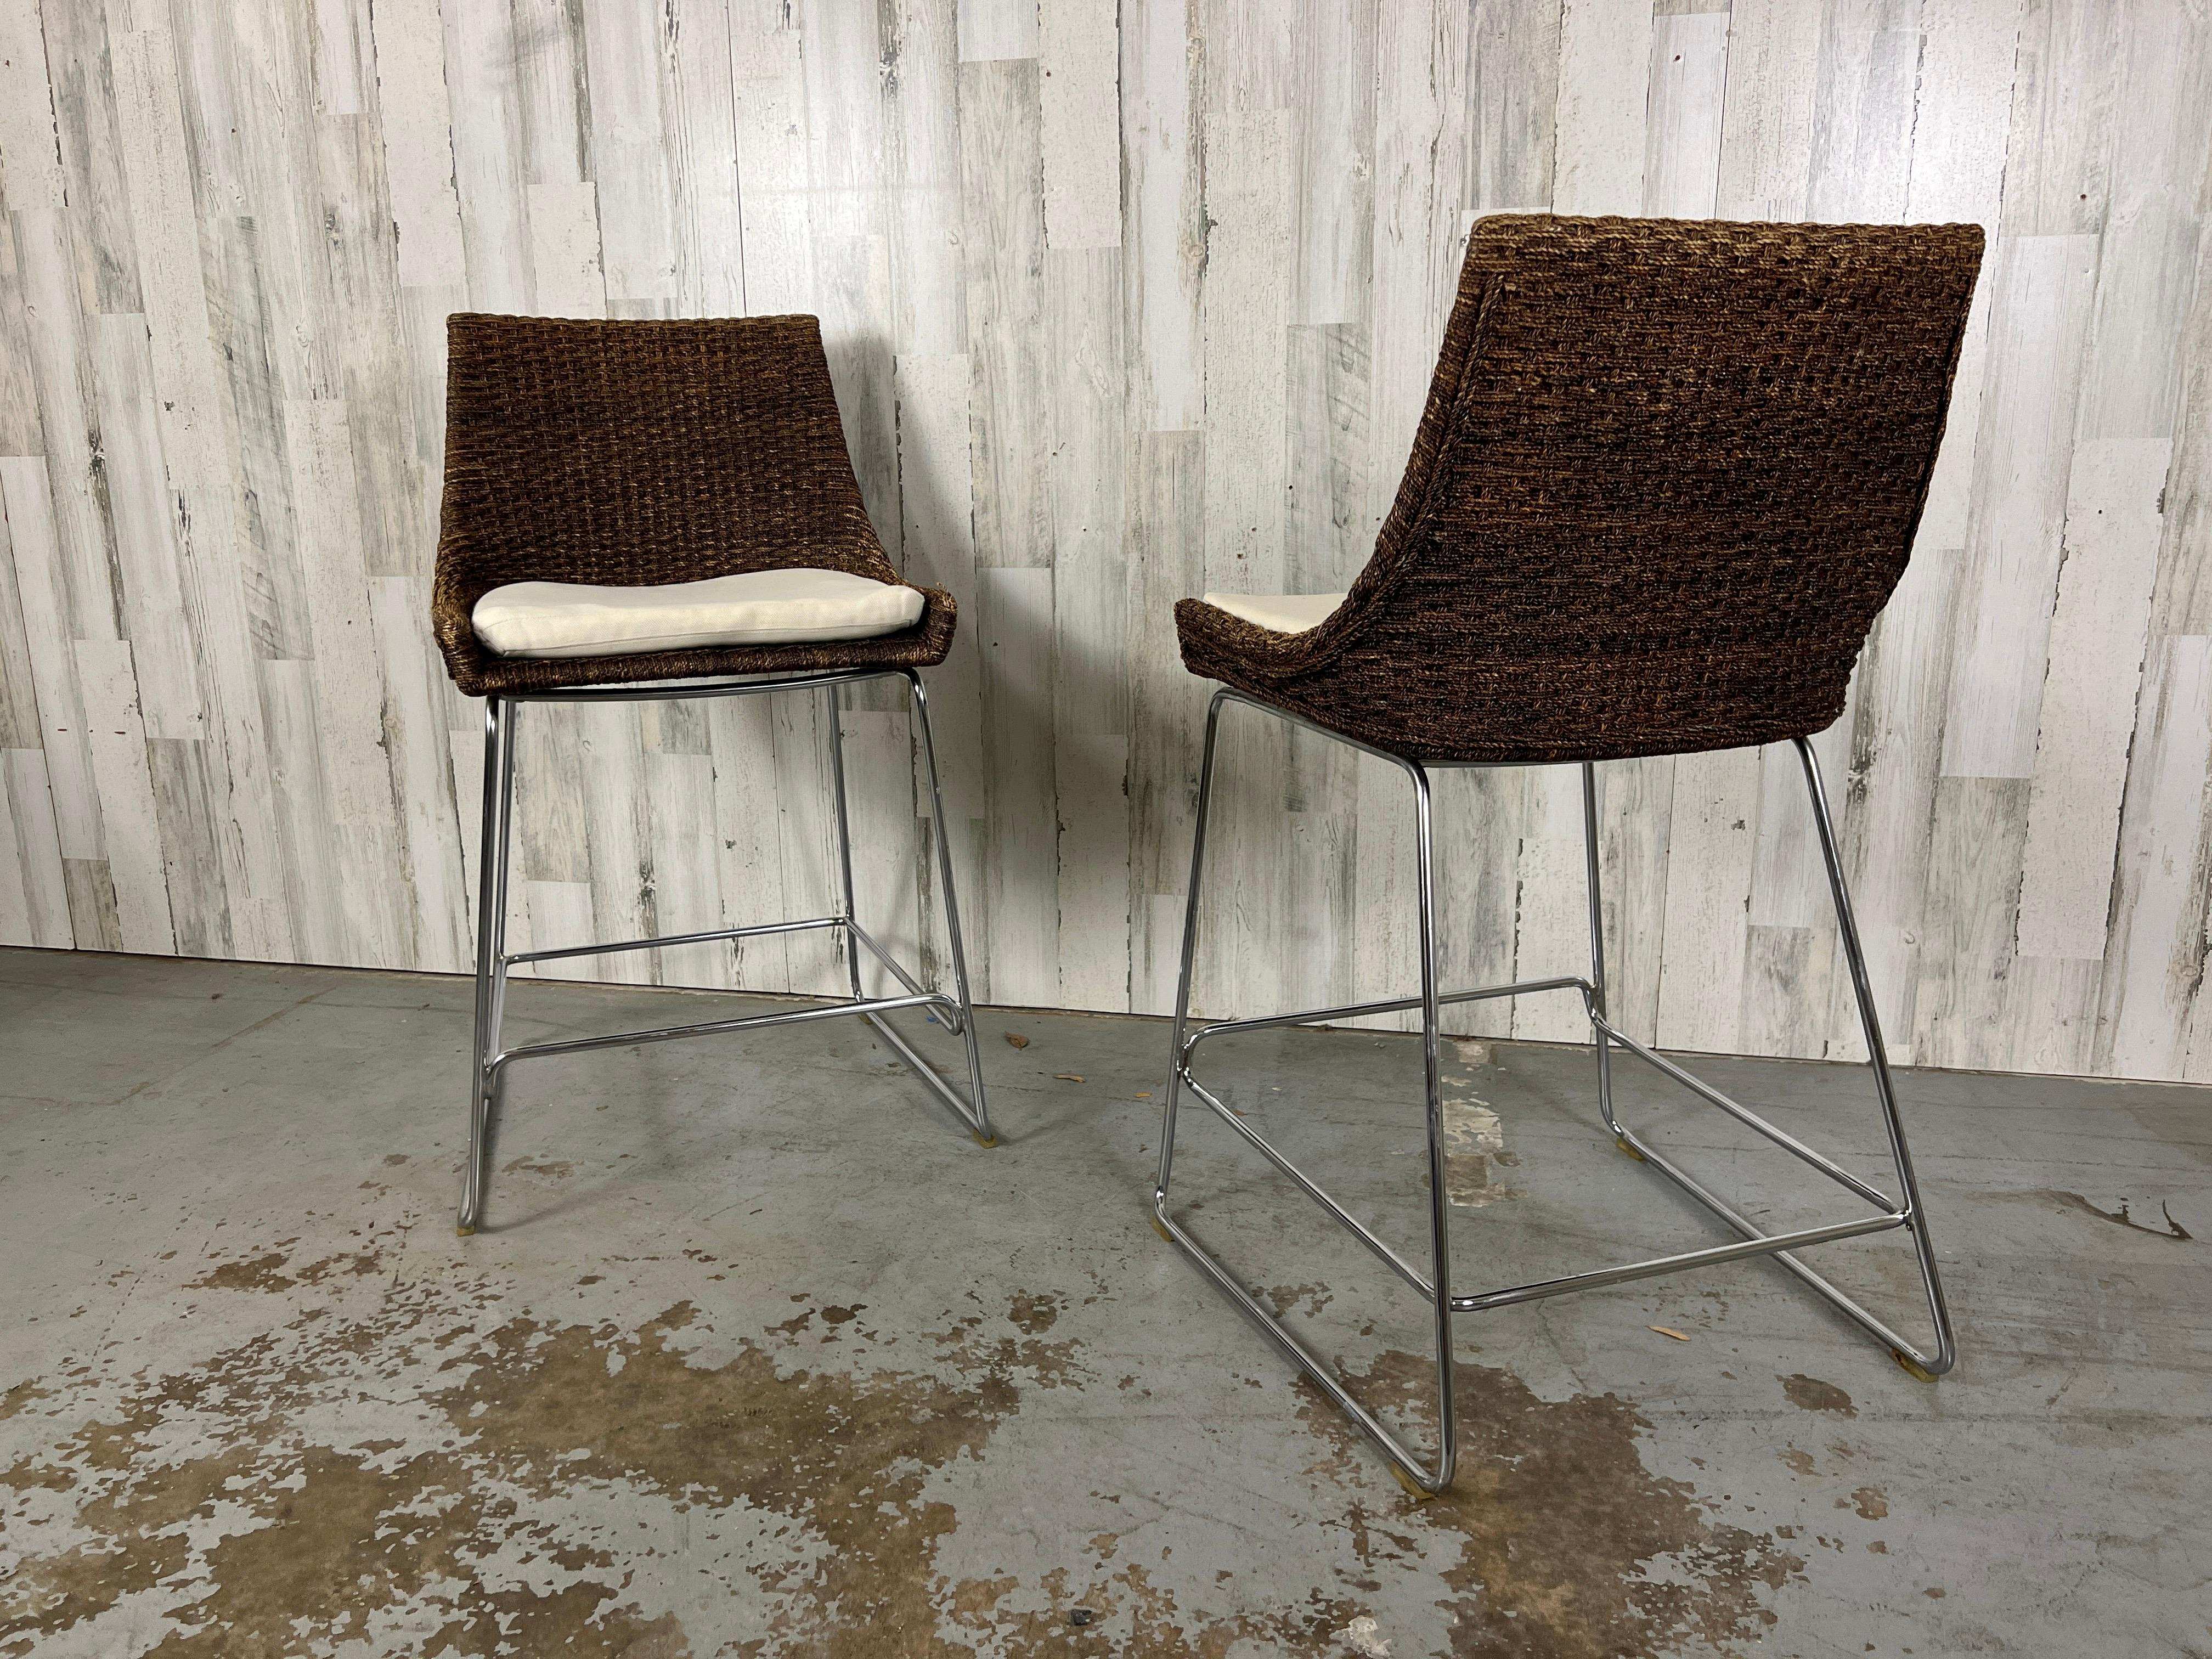 Counter height stools with woven Coco Abaca on top of a chrome sled style base.